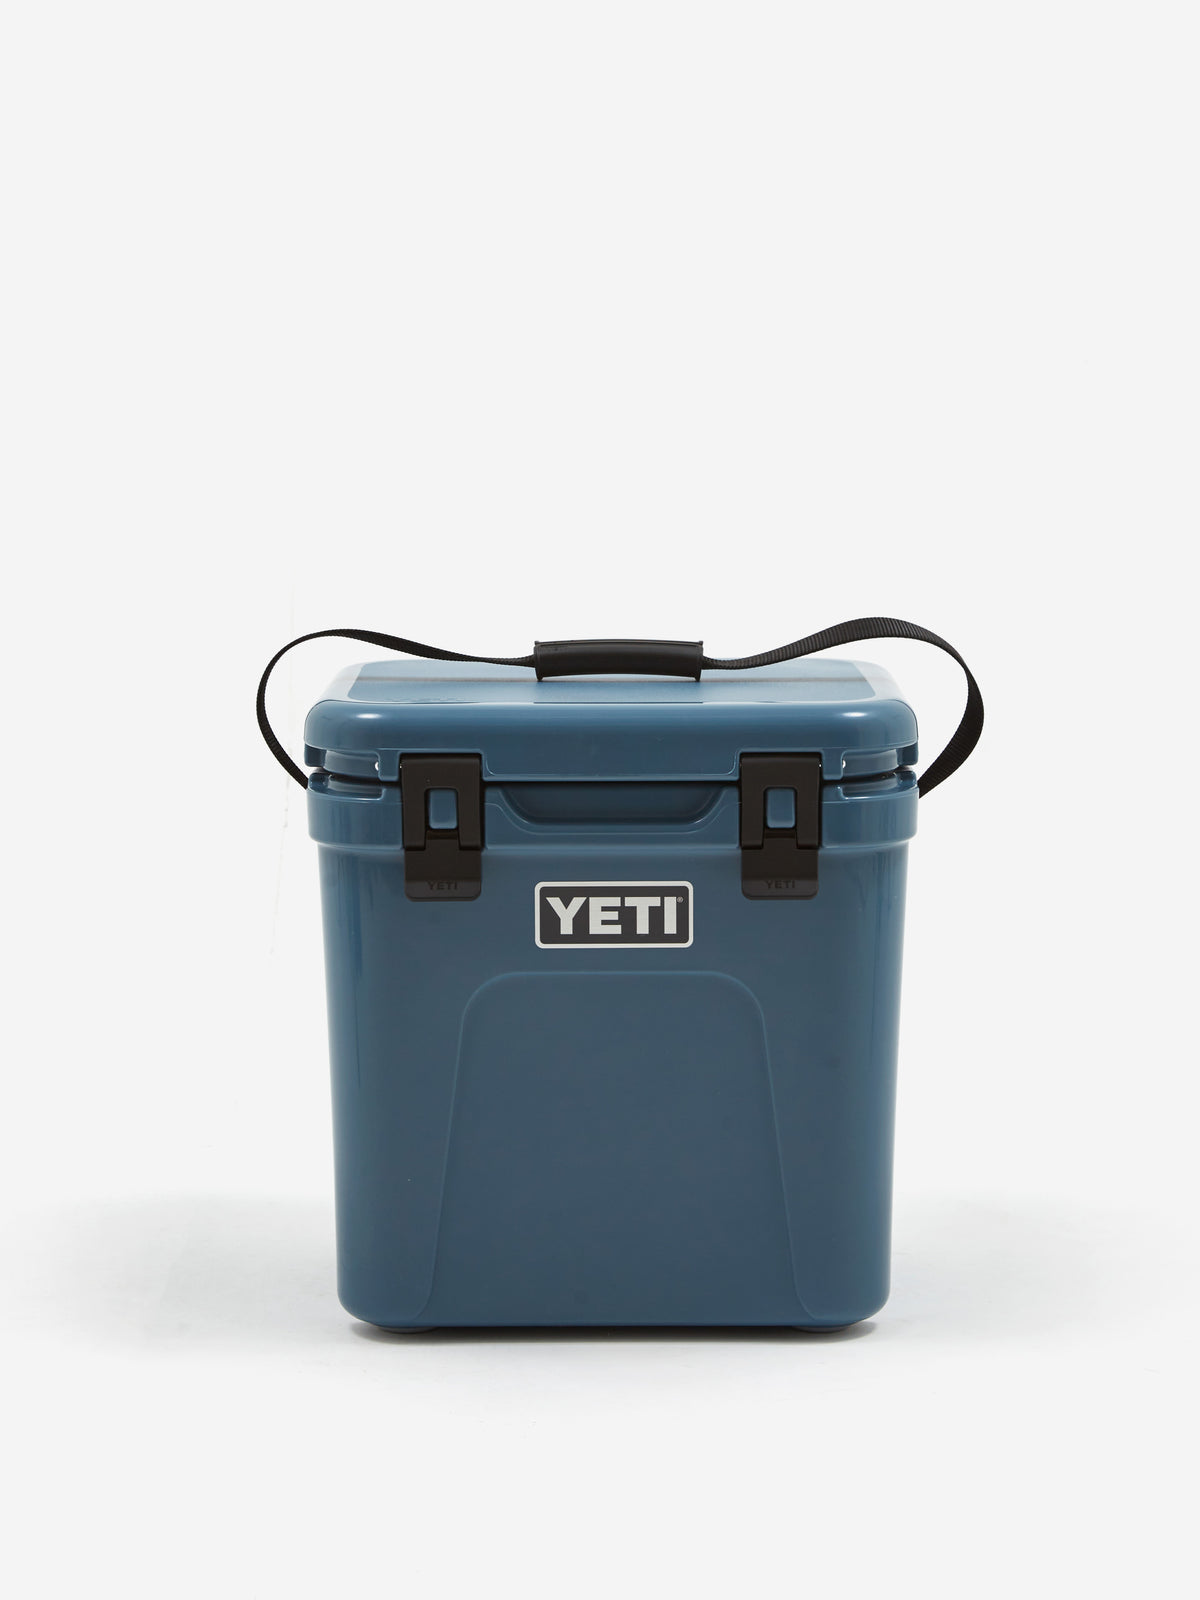 https://www.goodhoodstore.shop/wp-content/uploads/1692/13/find-great-online-shopping-at-affordable-prices-using-yeti-roadie-24-nordic-blue-yeti_0.jpg